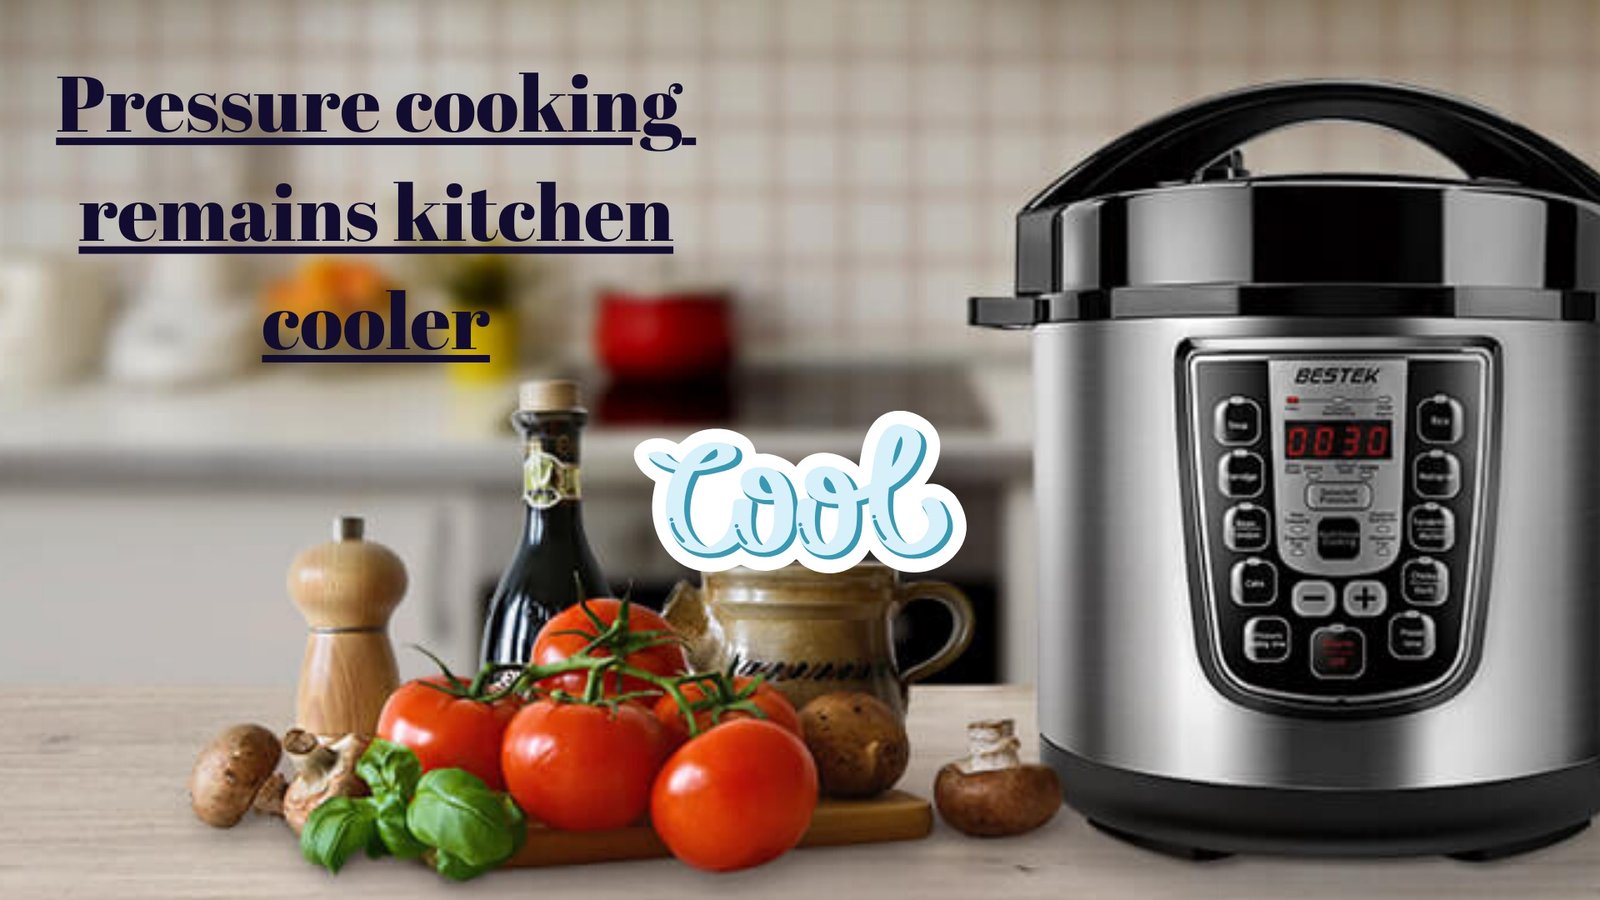 Advantages and disadvantages of pressure cookers